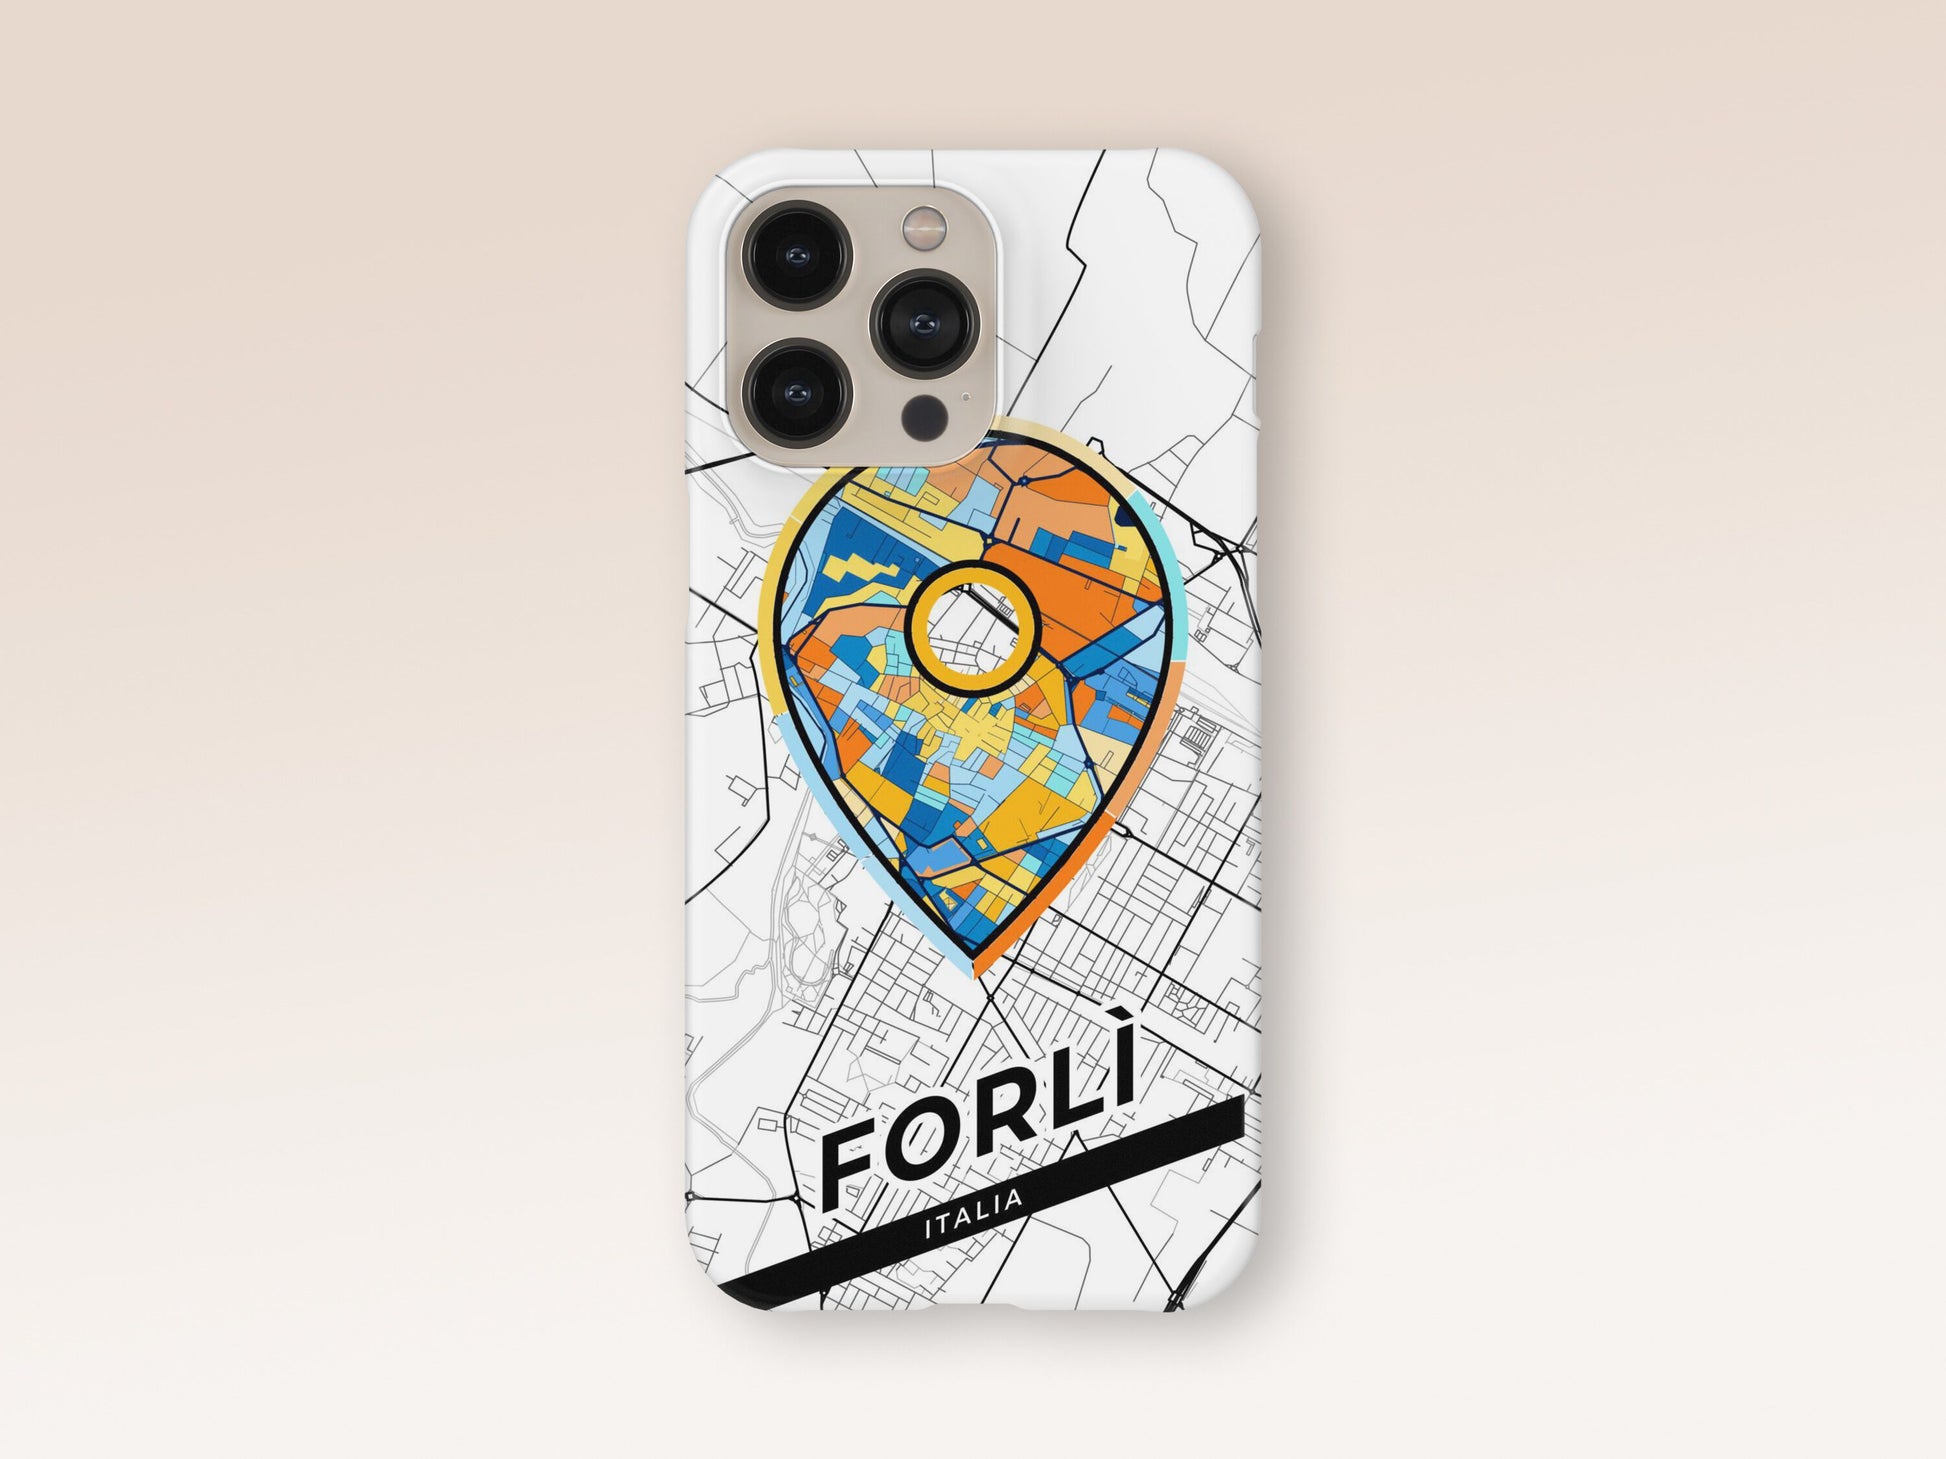 Forlì Italy slim phone case with colorful icon. Birthday, wedding or housewarming gift. Couple match cases. 1